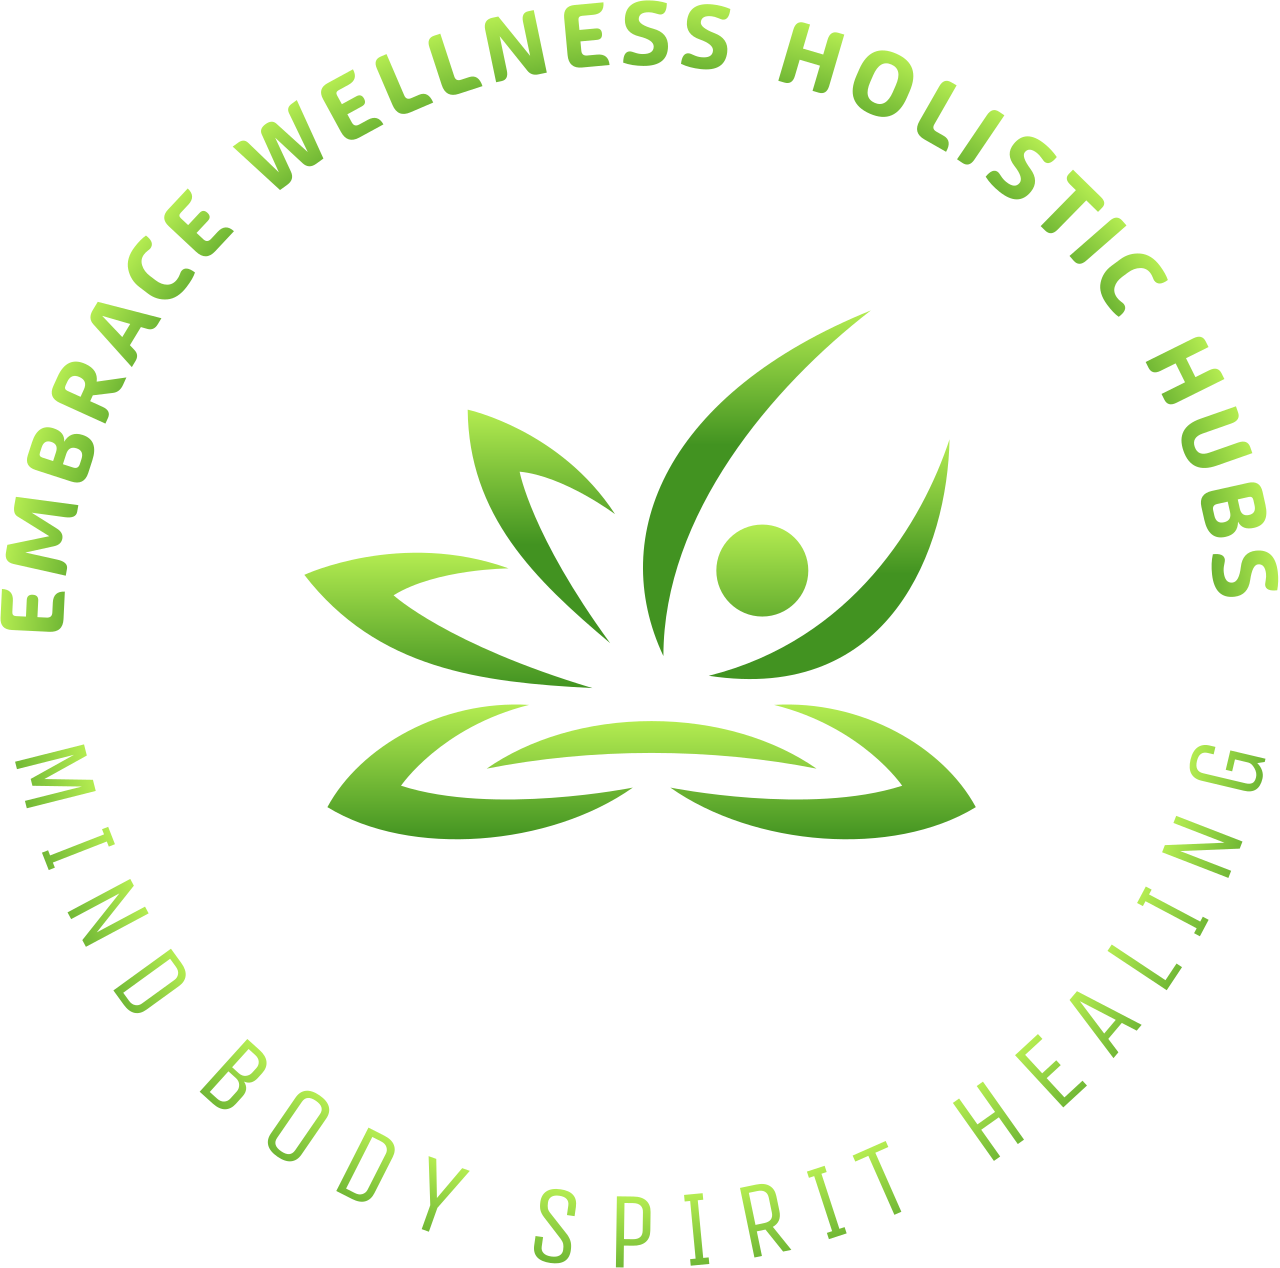 Embrace Wellness Holistic Hub: Restorative Natural Therapies on the Central Coast